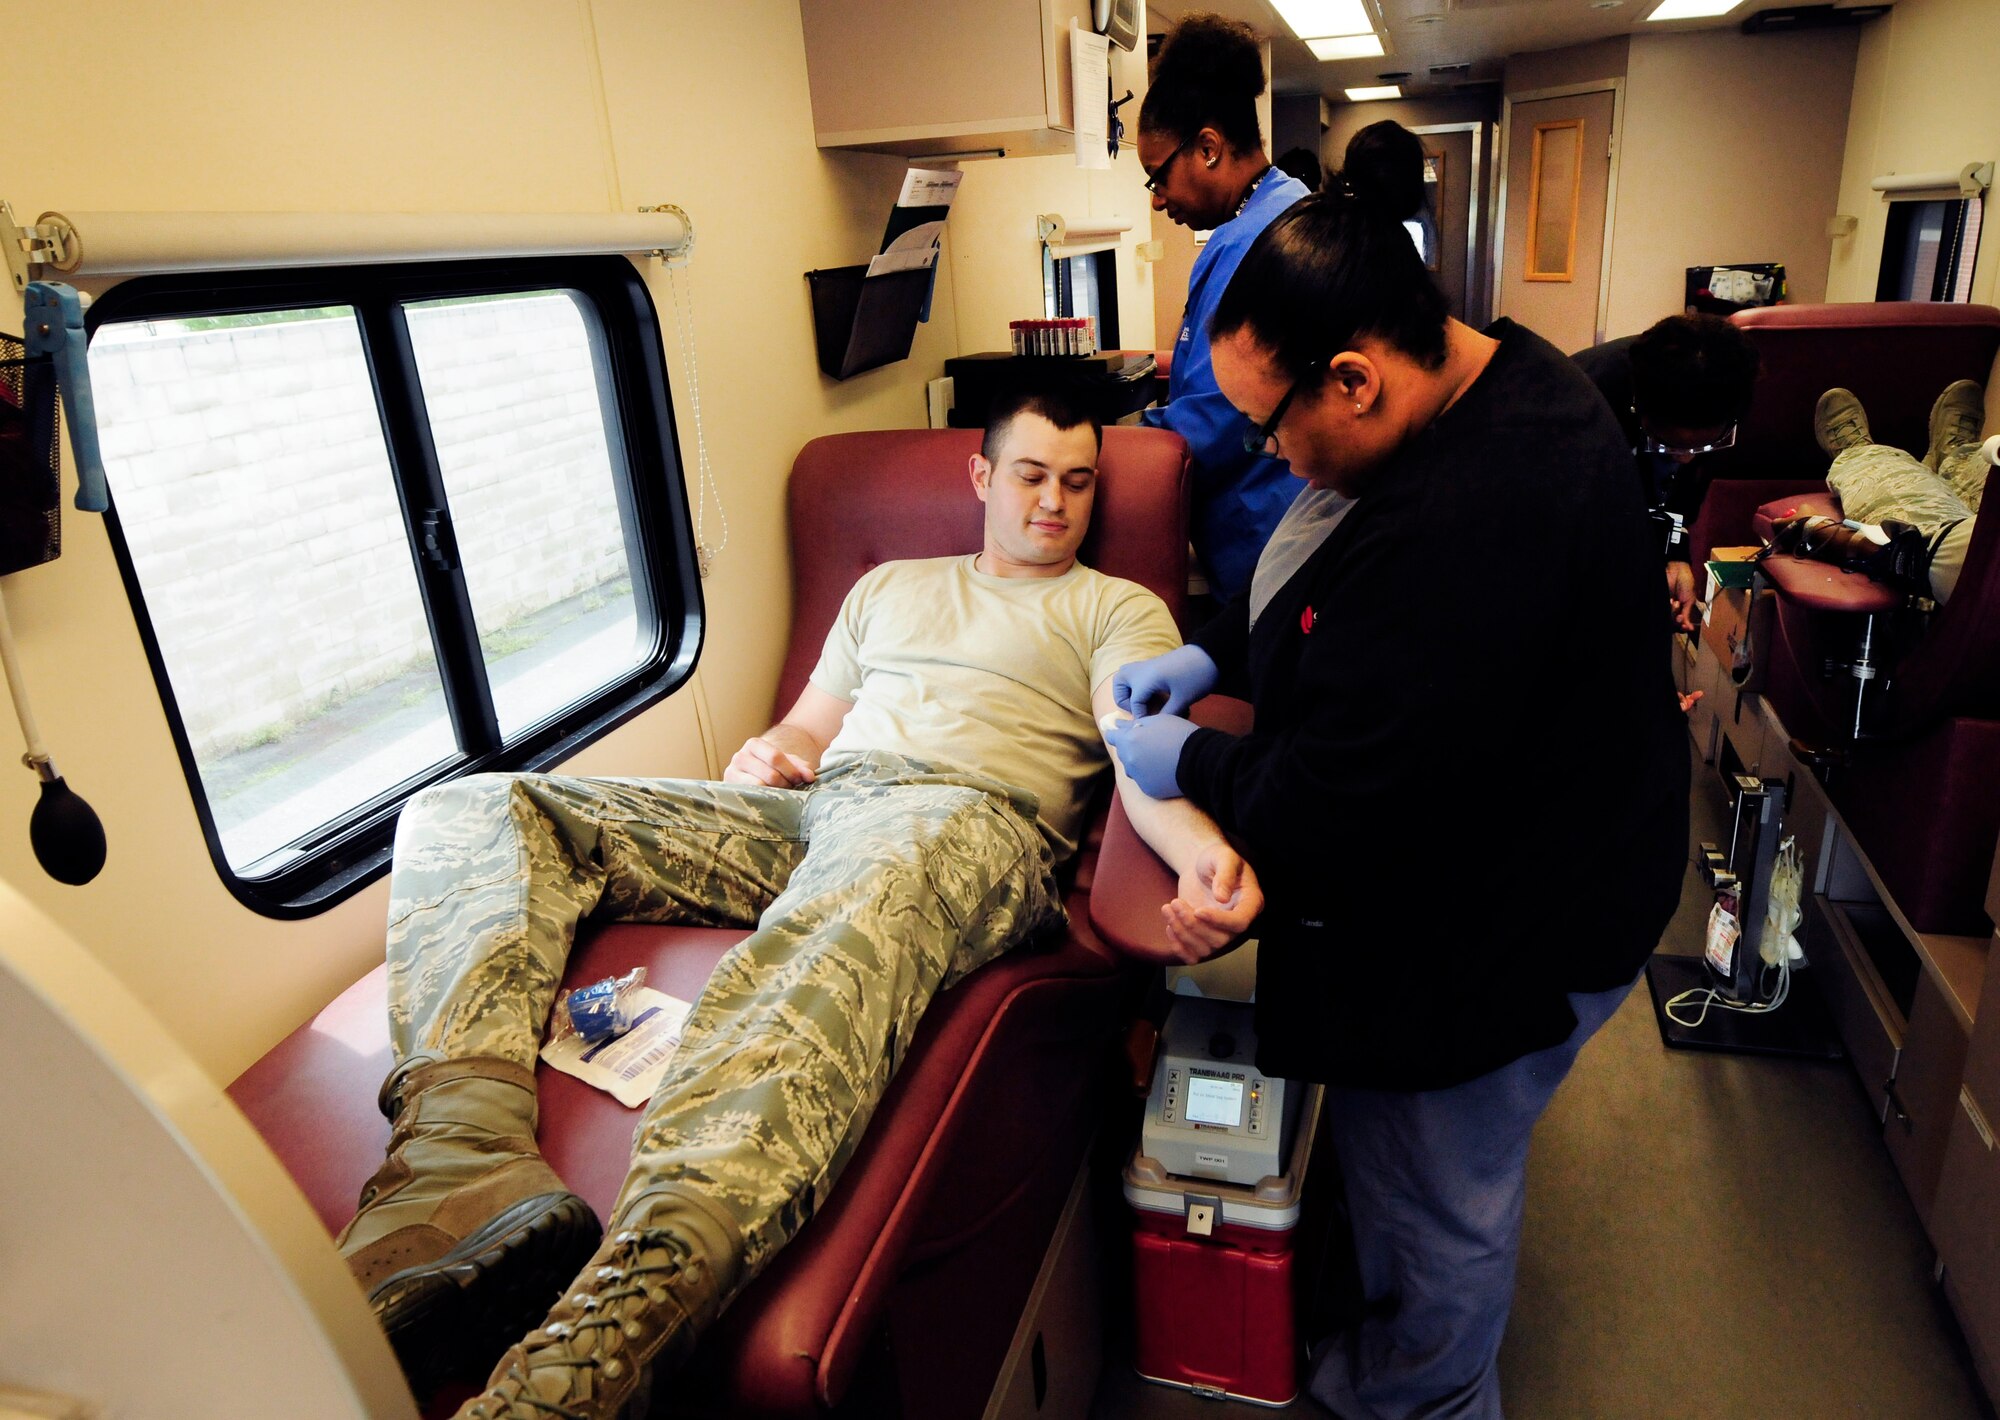 U. S. Air Force Staff Sgt. Bradley Hinote, 145th Communications Flight, donates blood inside the Community Blood Center of the Carolinas mobile unit, during a blood drive held at the North Carolina Air National Guard base, Charlotte Douglas Intl. Airport, April 18, 2015. The blood donated by airmen at CBCC stays in the community helping patients in local hospitals. (U.S. Air National Guard photo by Master Sgt. Patricia F. Moran, 145th Public Affairs/Released)